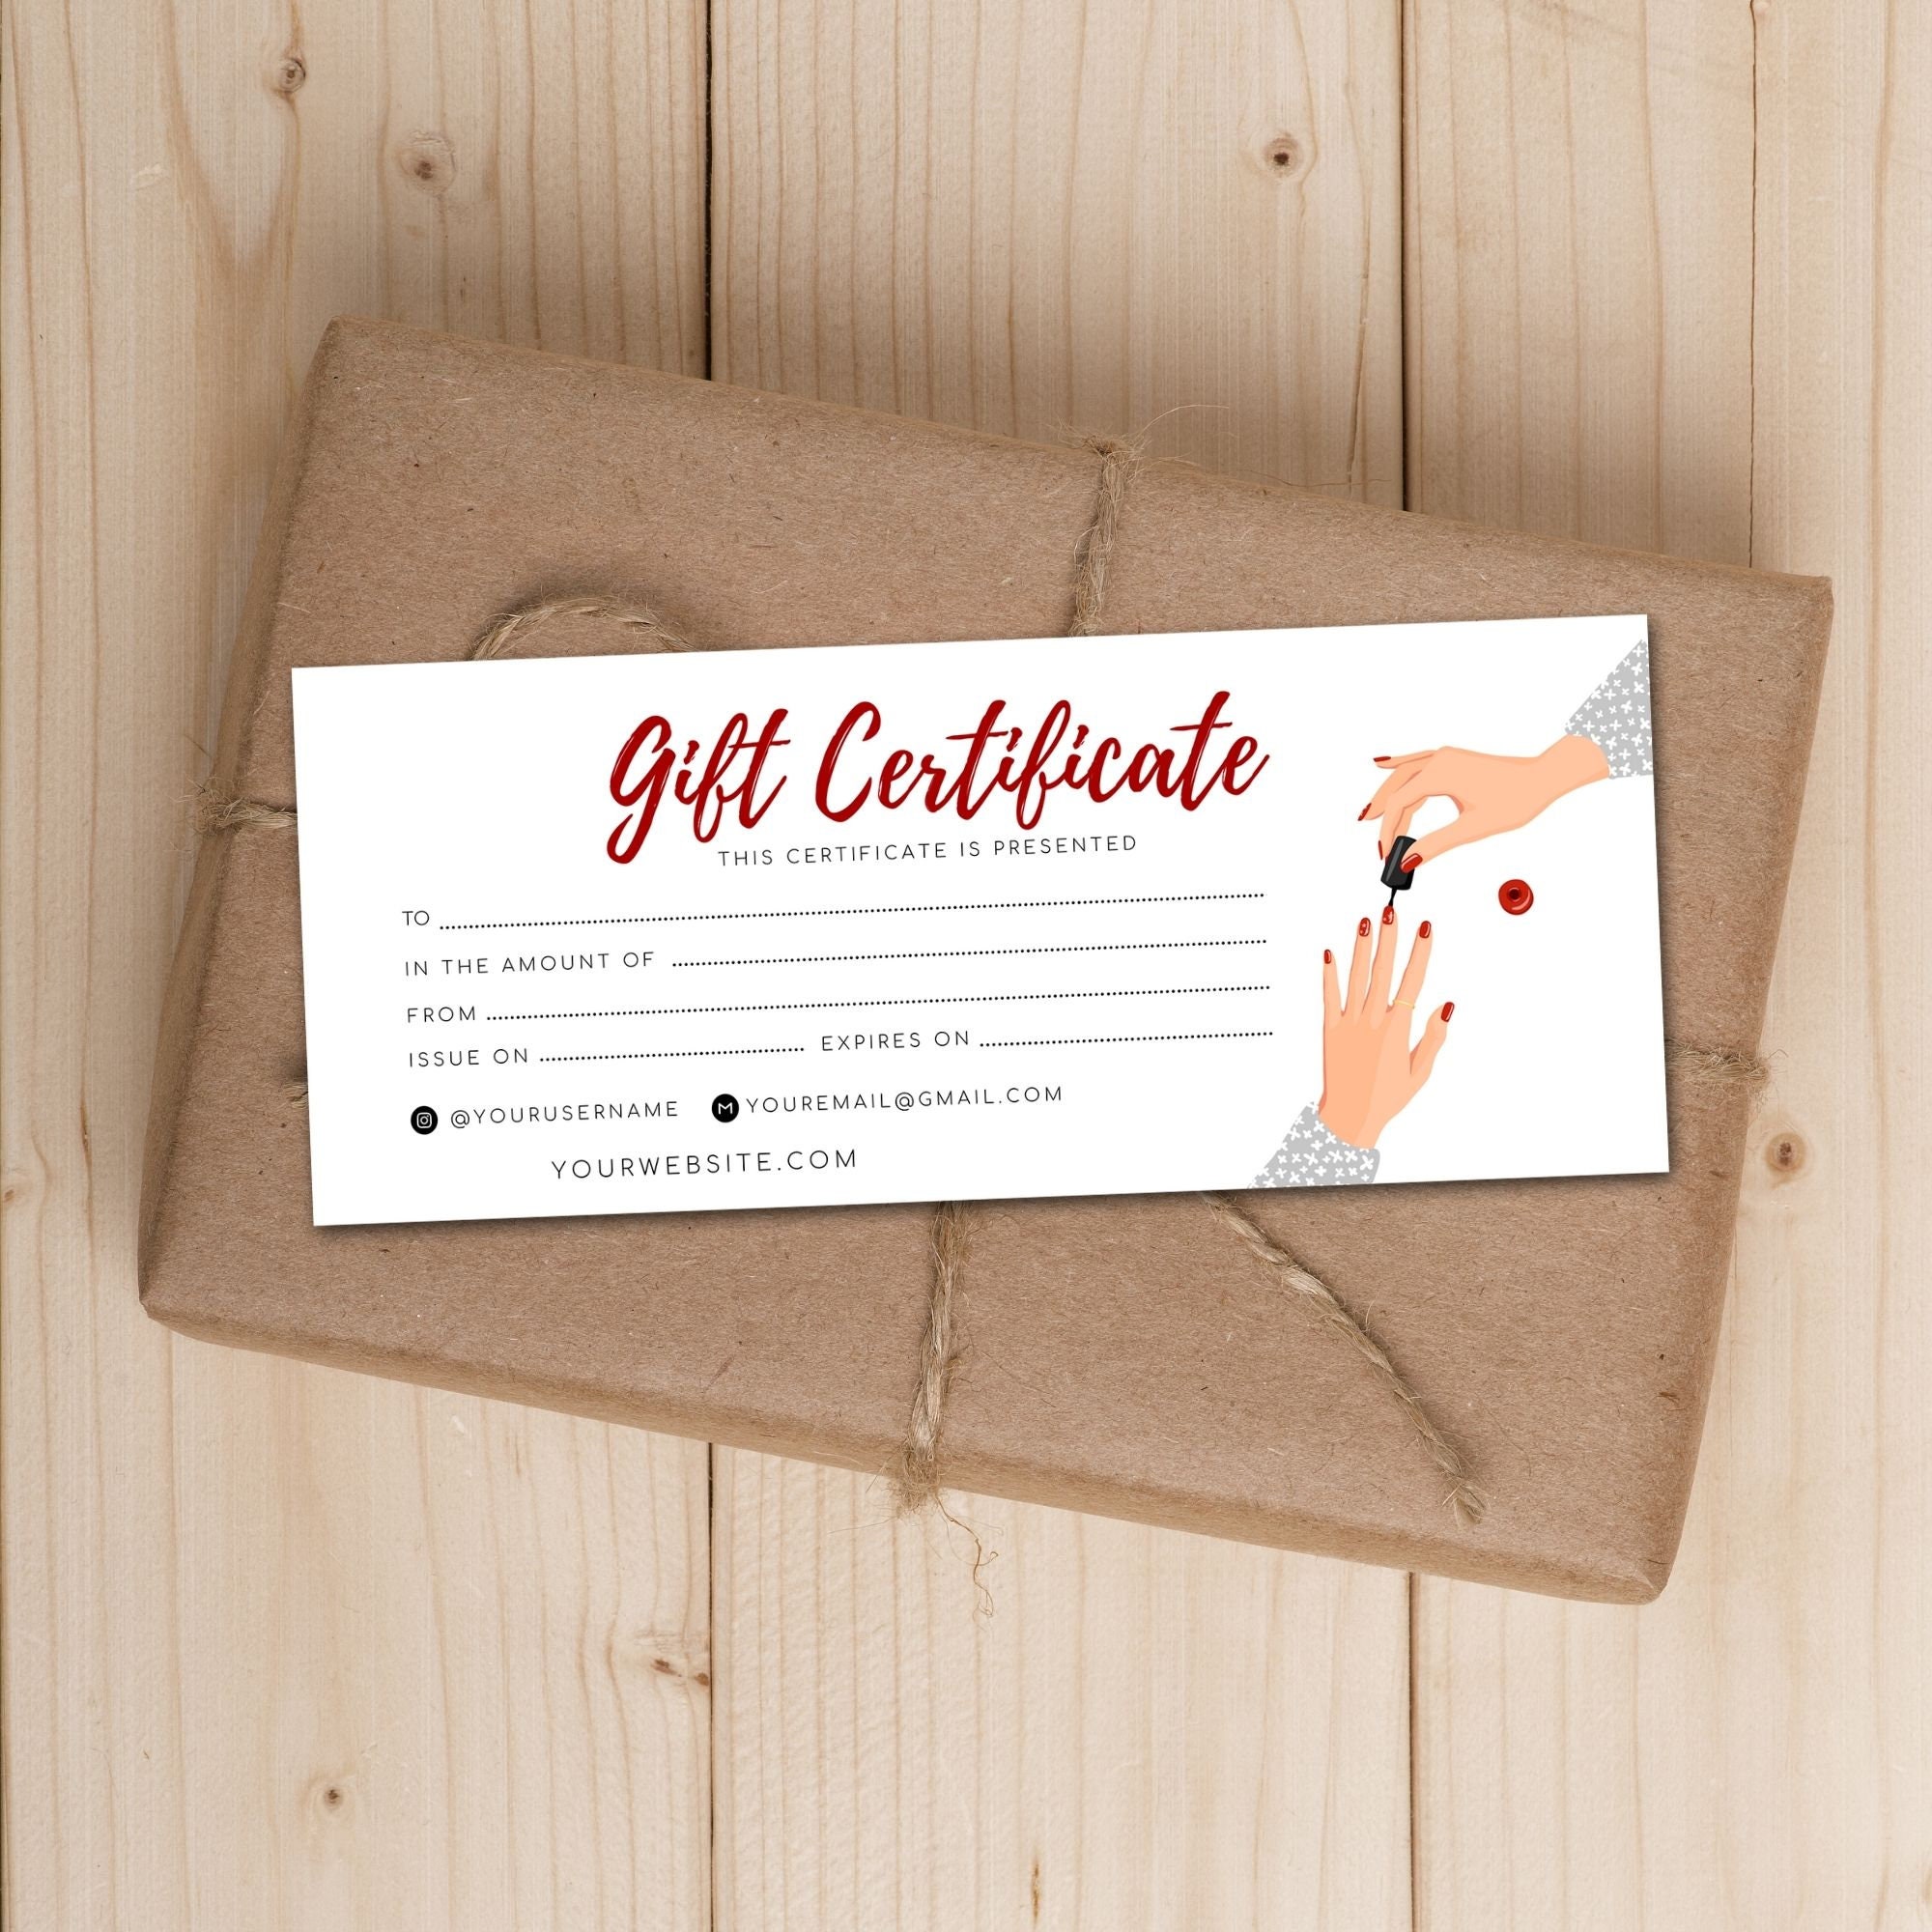 gift-certificate-nail-salon-manicure-gift-card-editable-etsy